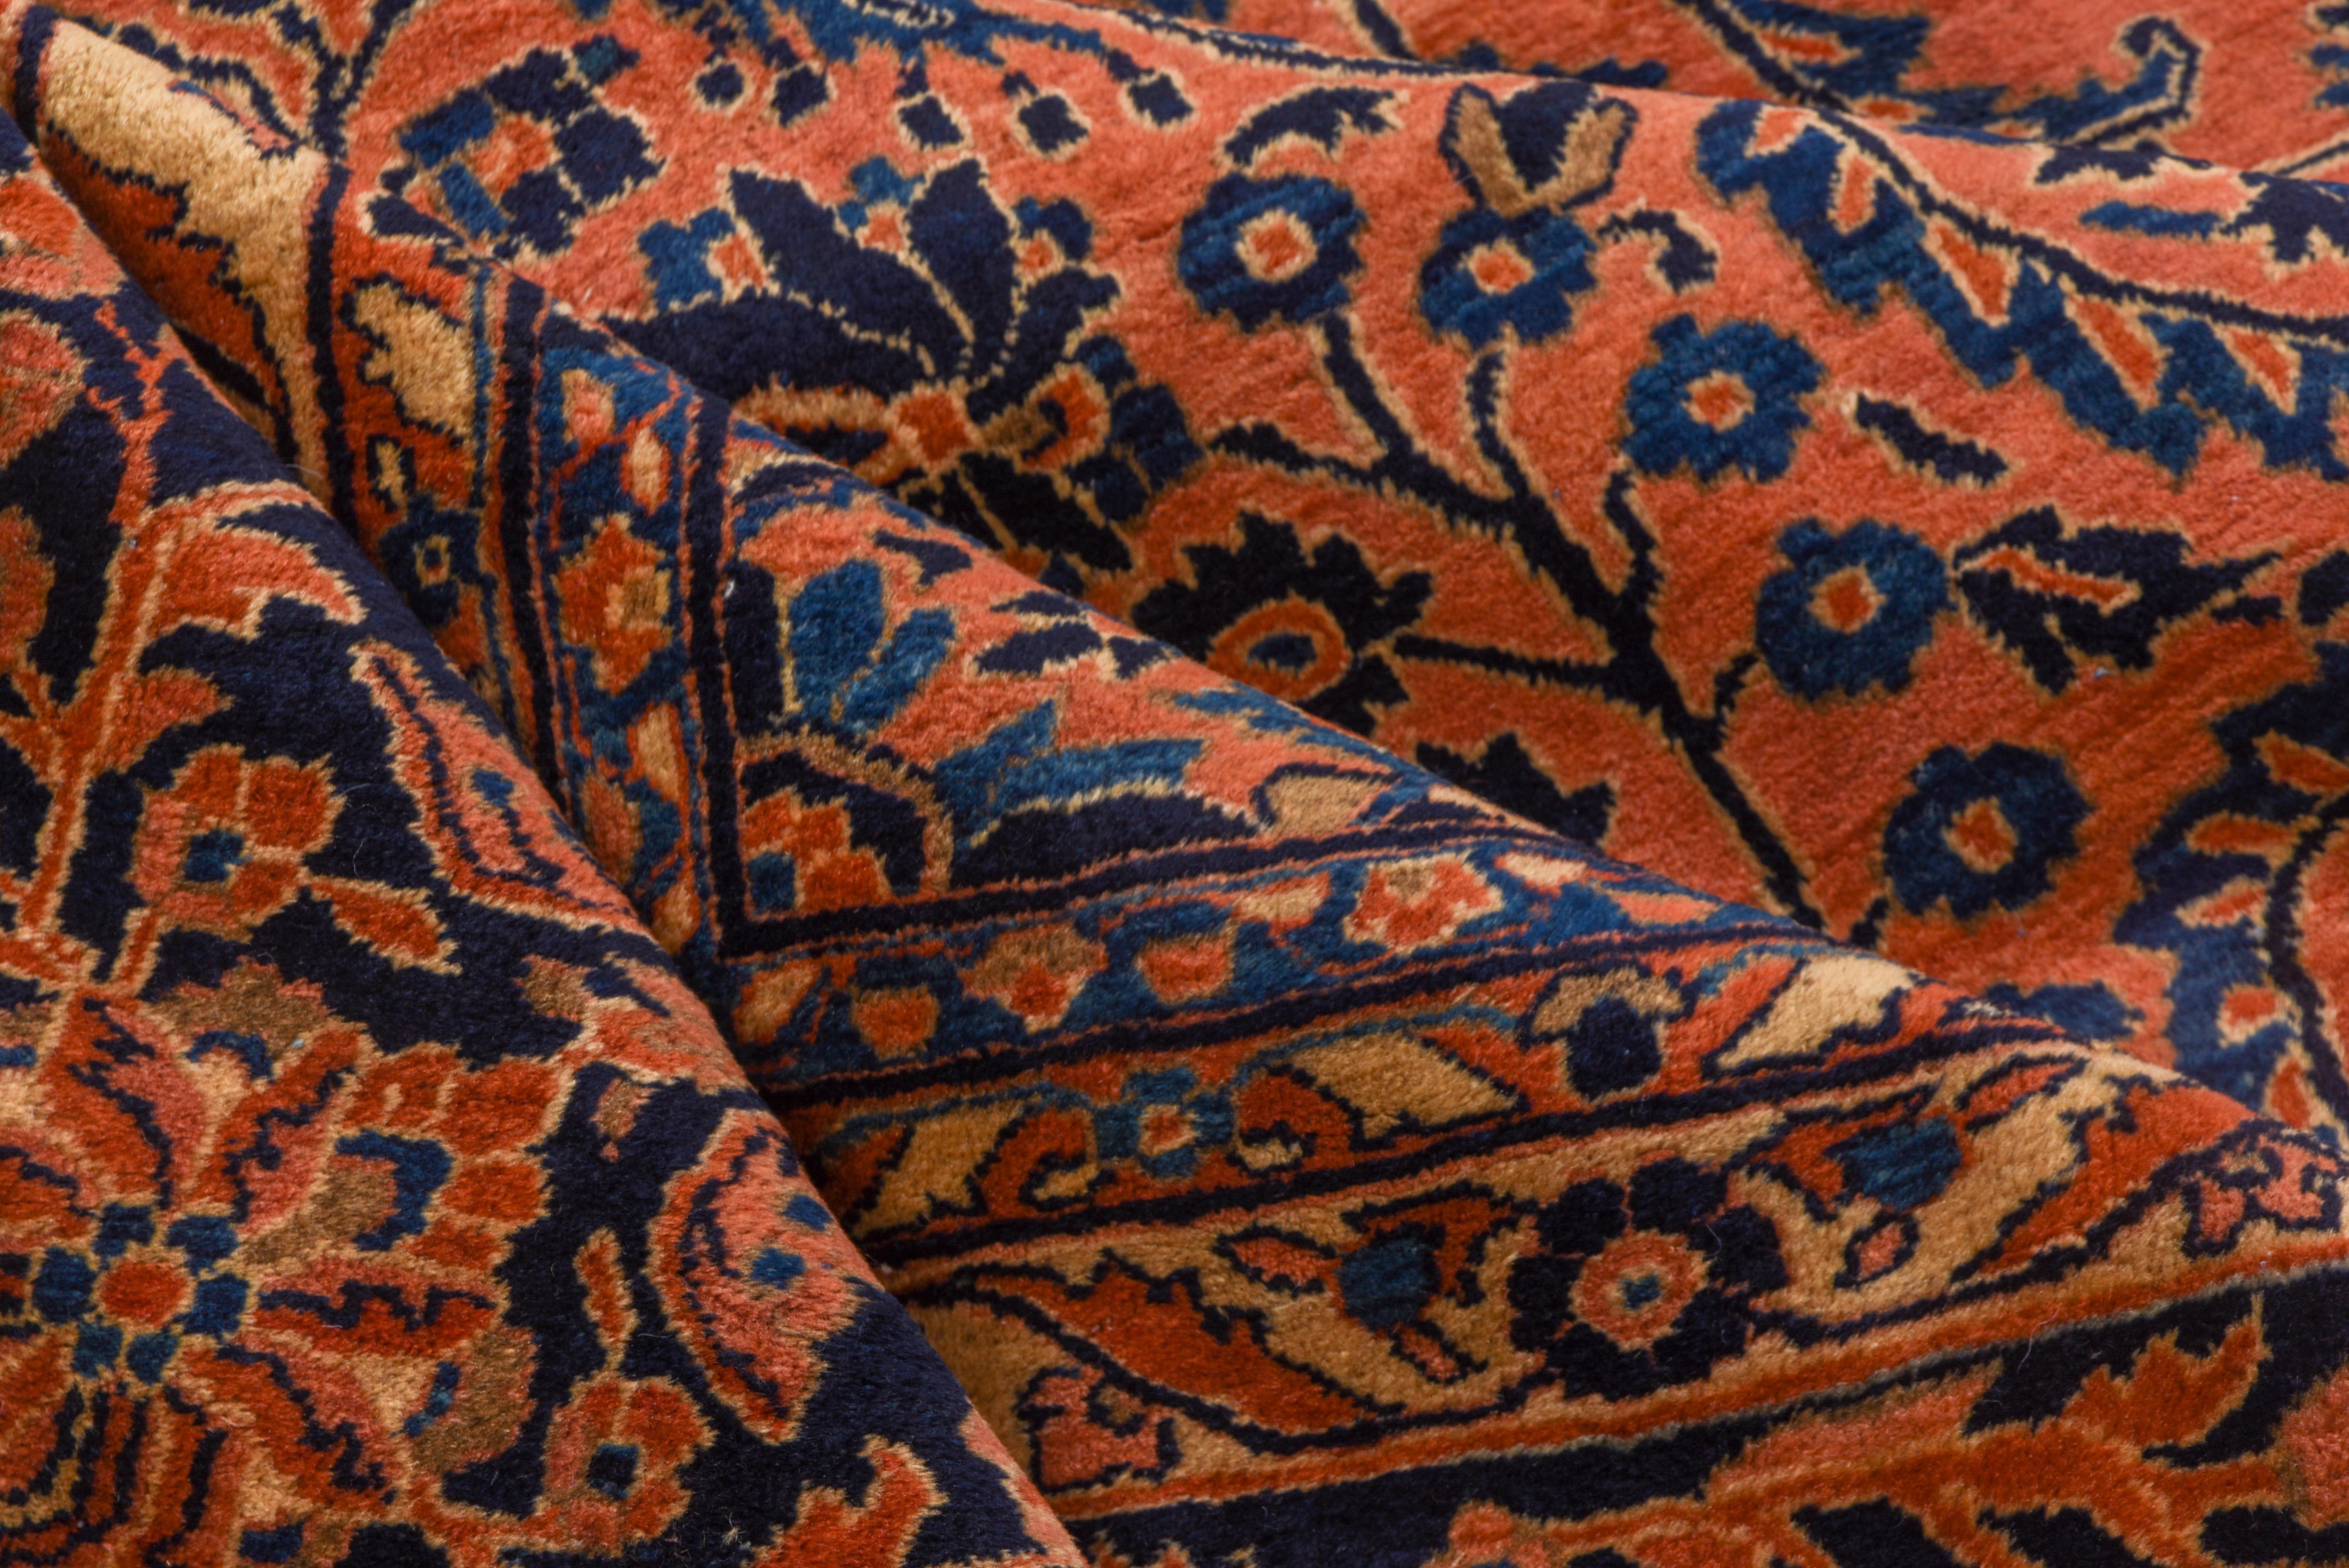 This is a Classic example of the incredibly popular west Persian Sarouk carpets made almost exclusively for the American market. The rosy orange field shows a close all-over pattern of closely set floral sprays accented in various blue tones. The